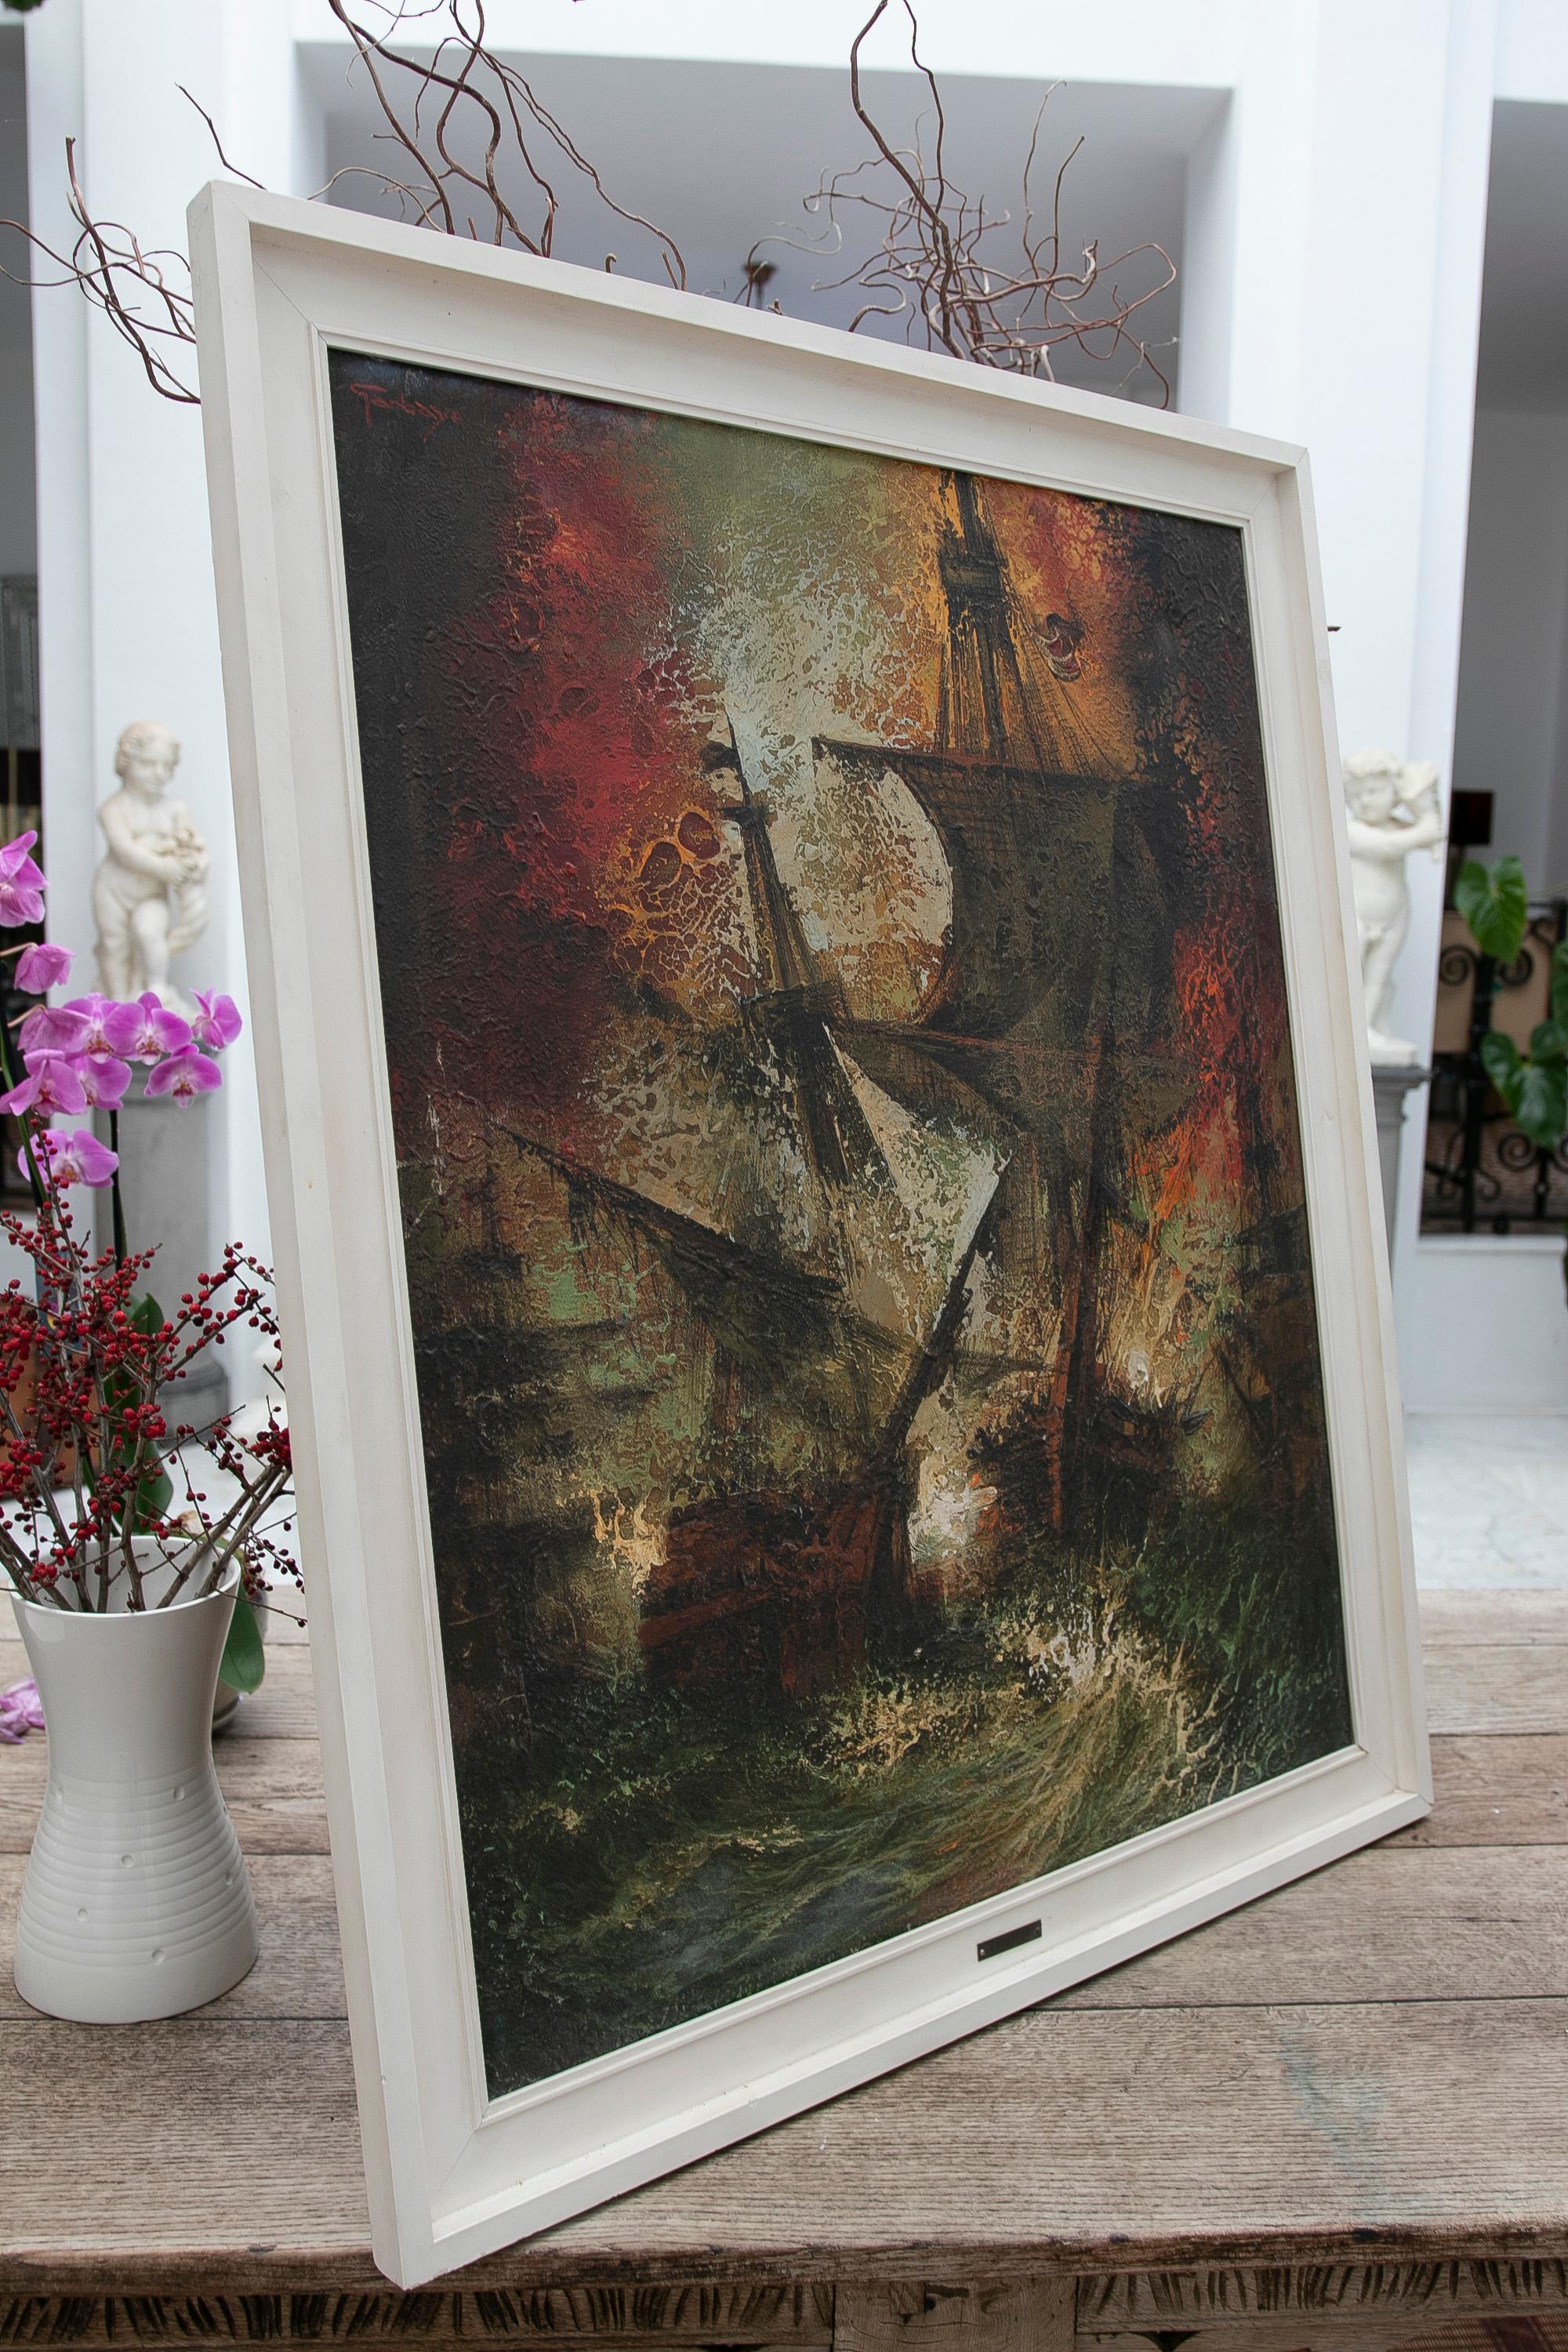 Impressionist Marine painting by Garballo with white frame 
Measurements with frame: 114 x 94 x 4 cm.